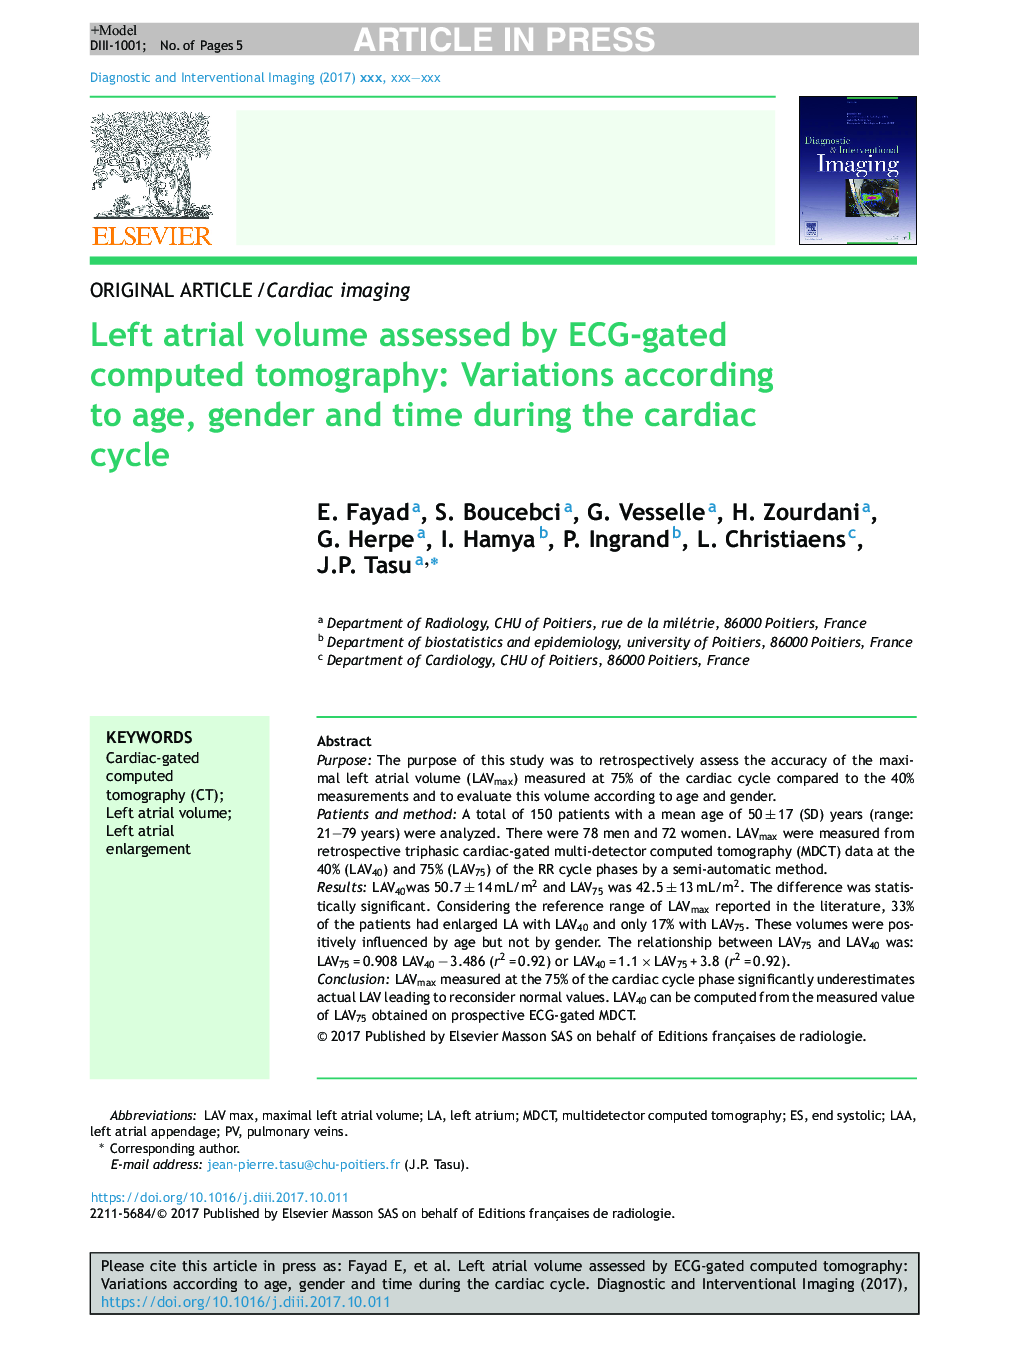 Left atrial volume assessed by ECG-gated computed tomography: Variations according to age, gender and time during the cardiac cycle